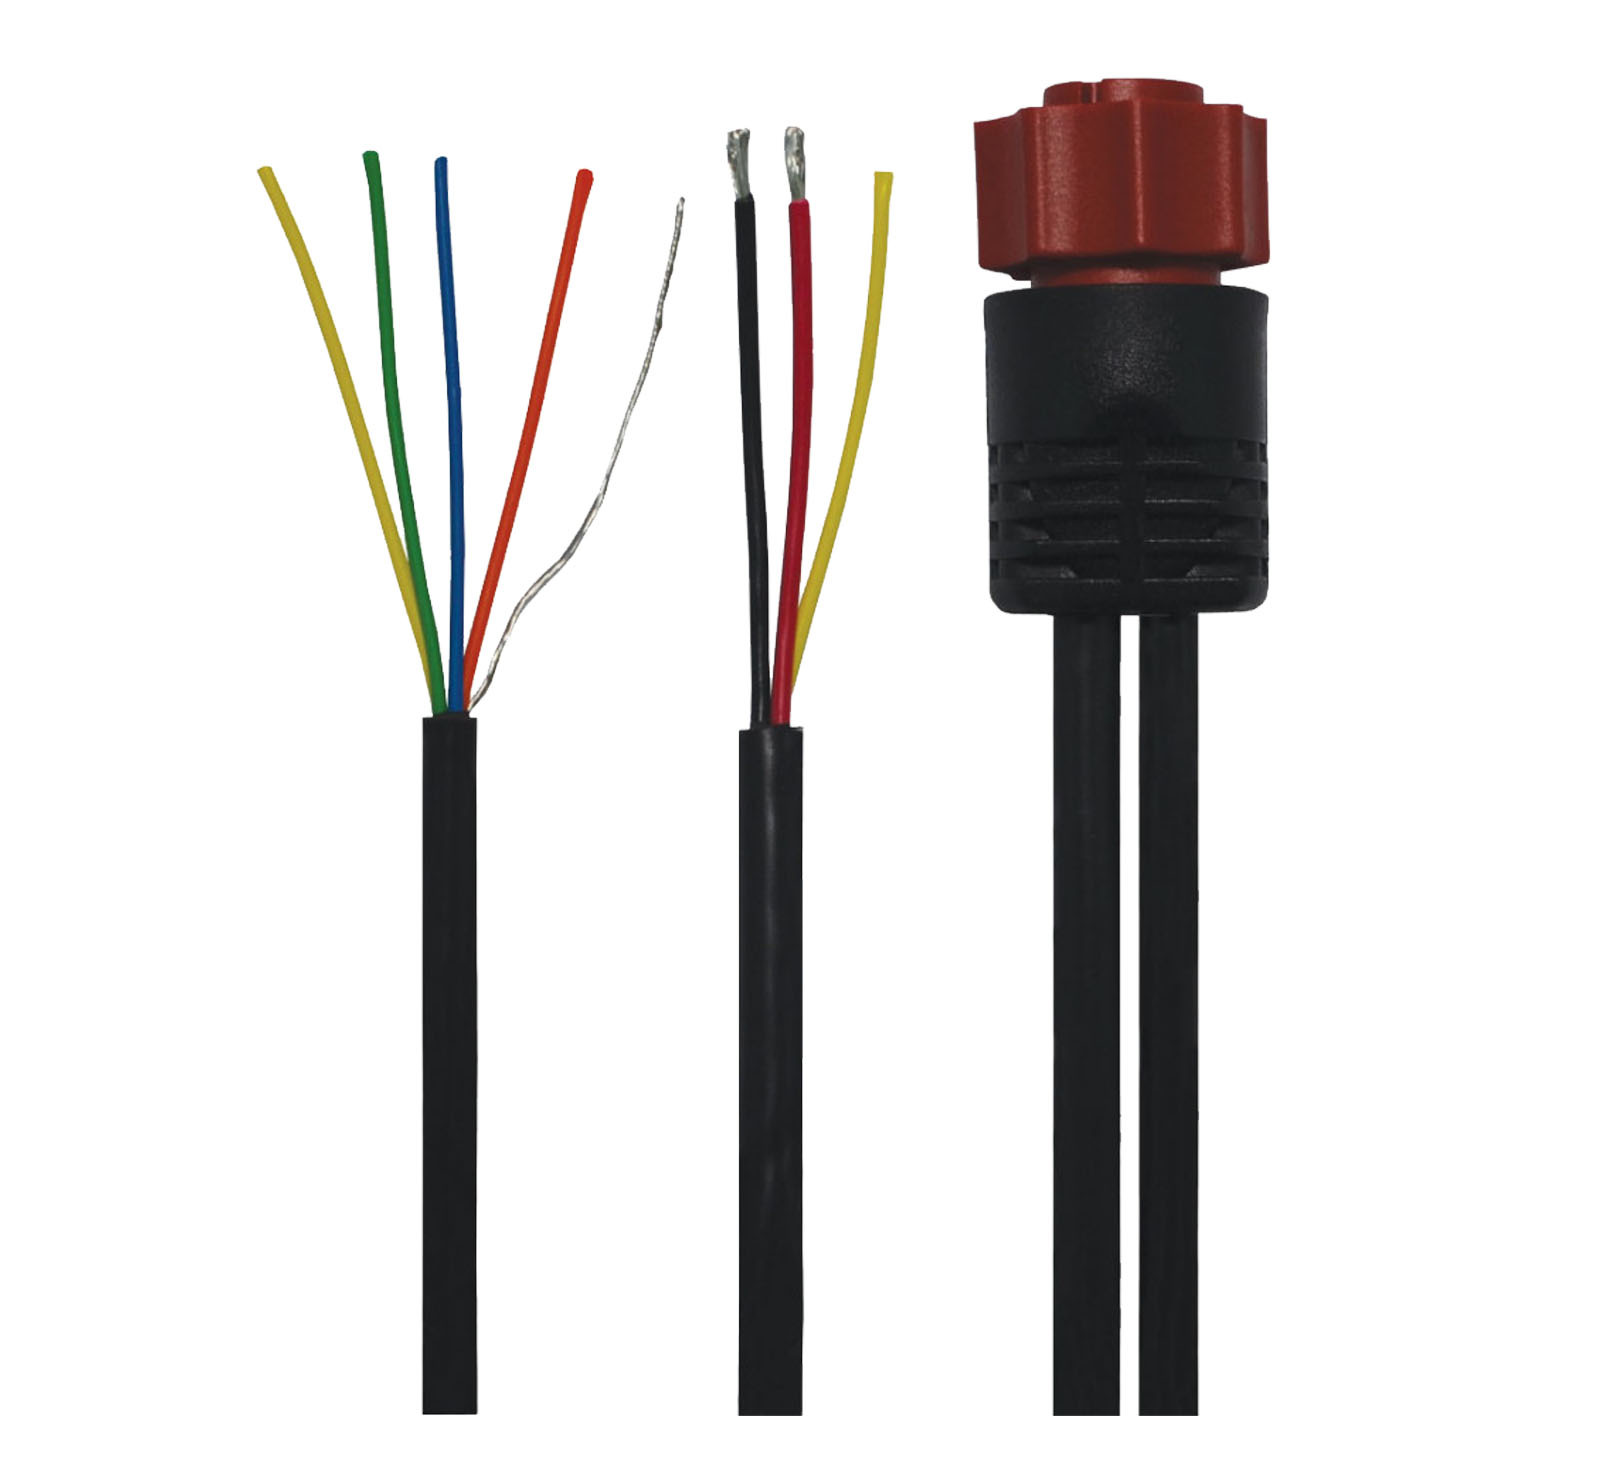 000-0127-49 PC-30-RS422 Power Cable for Lowrance Hds Series Elite Hook 4  Chirp, Red, Dual RS-422 Communication Ports 3005.6833 - AliExpress